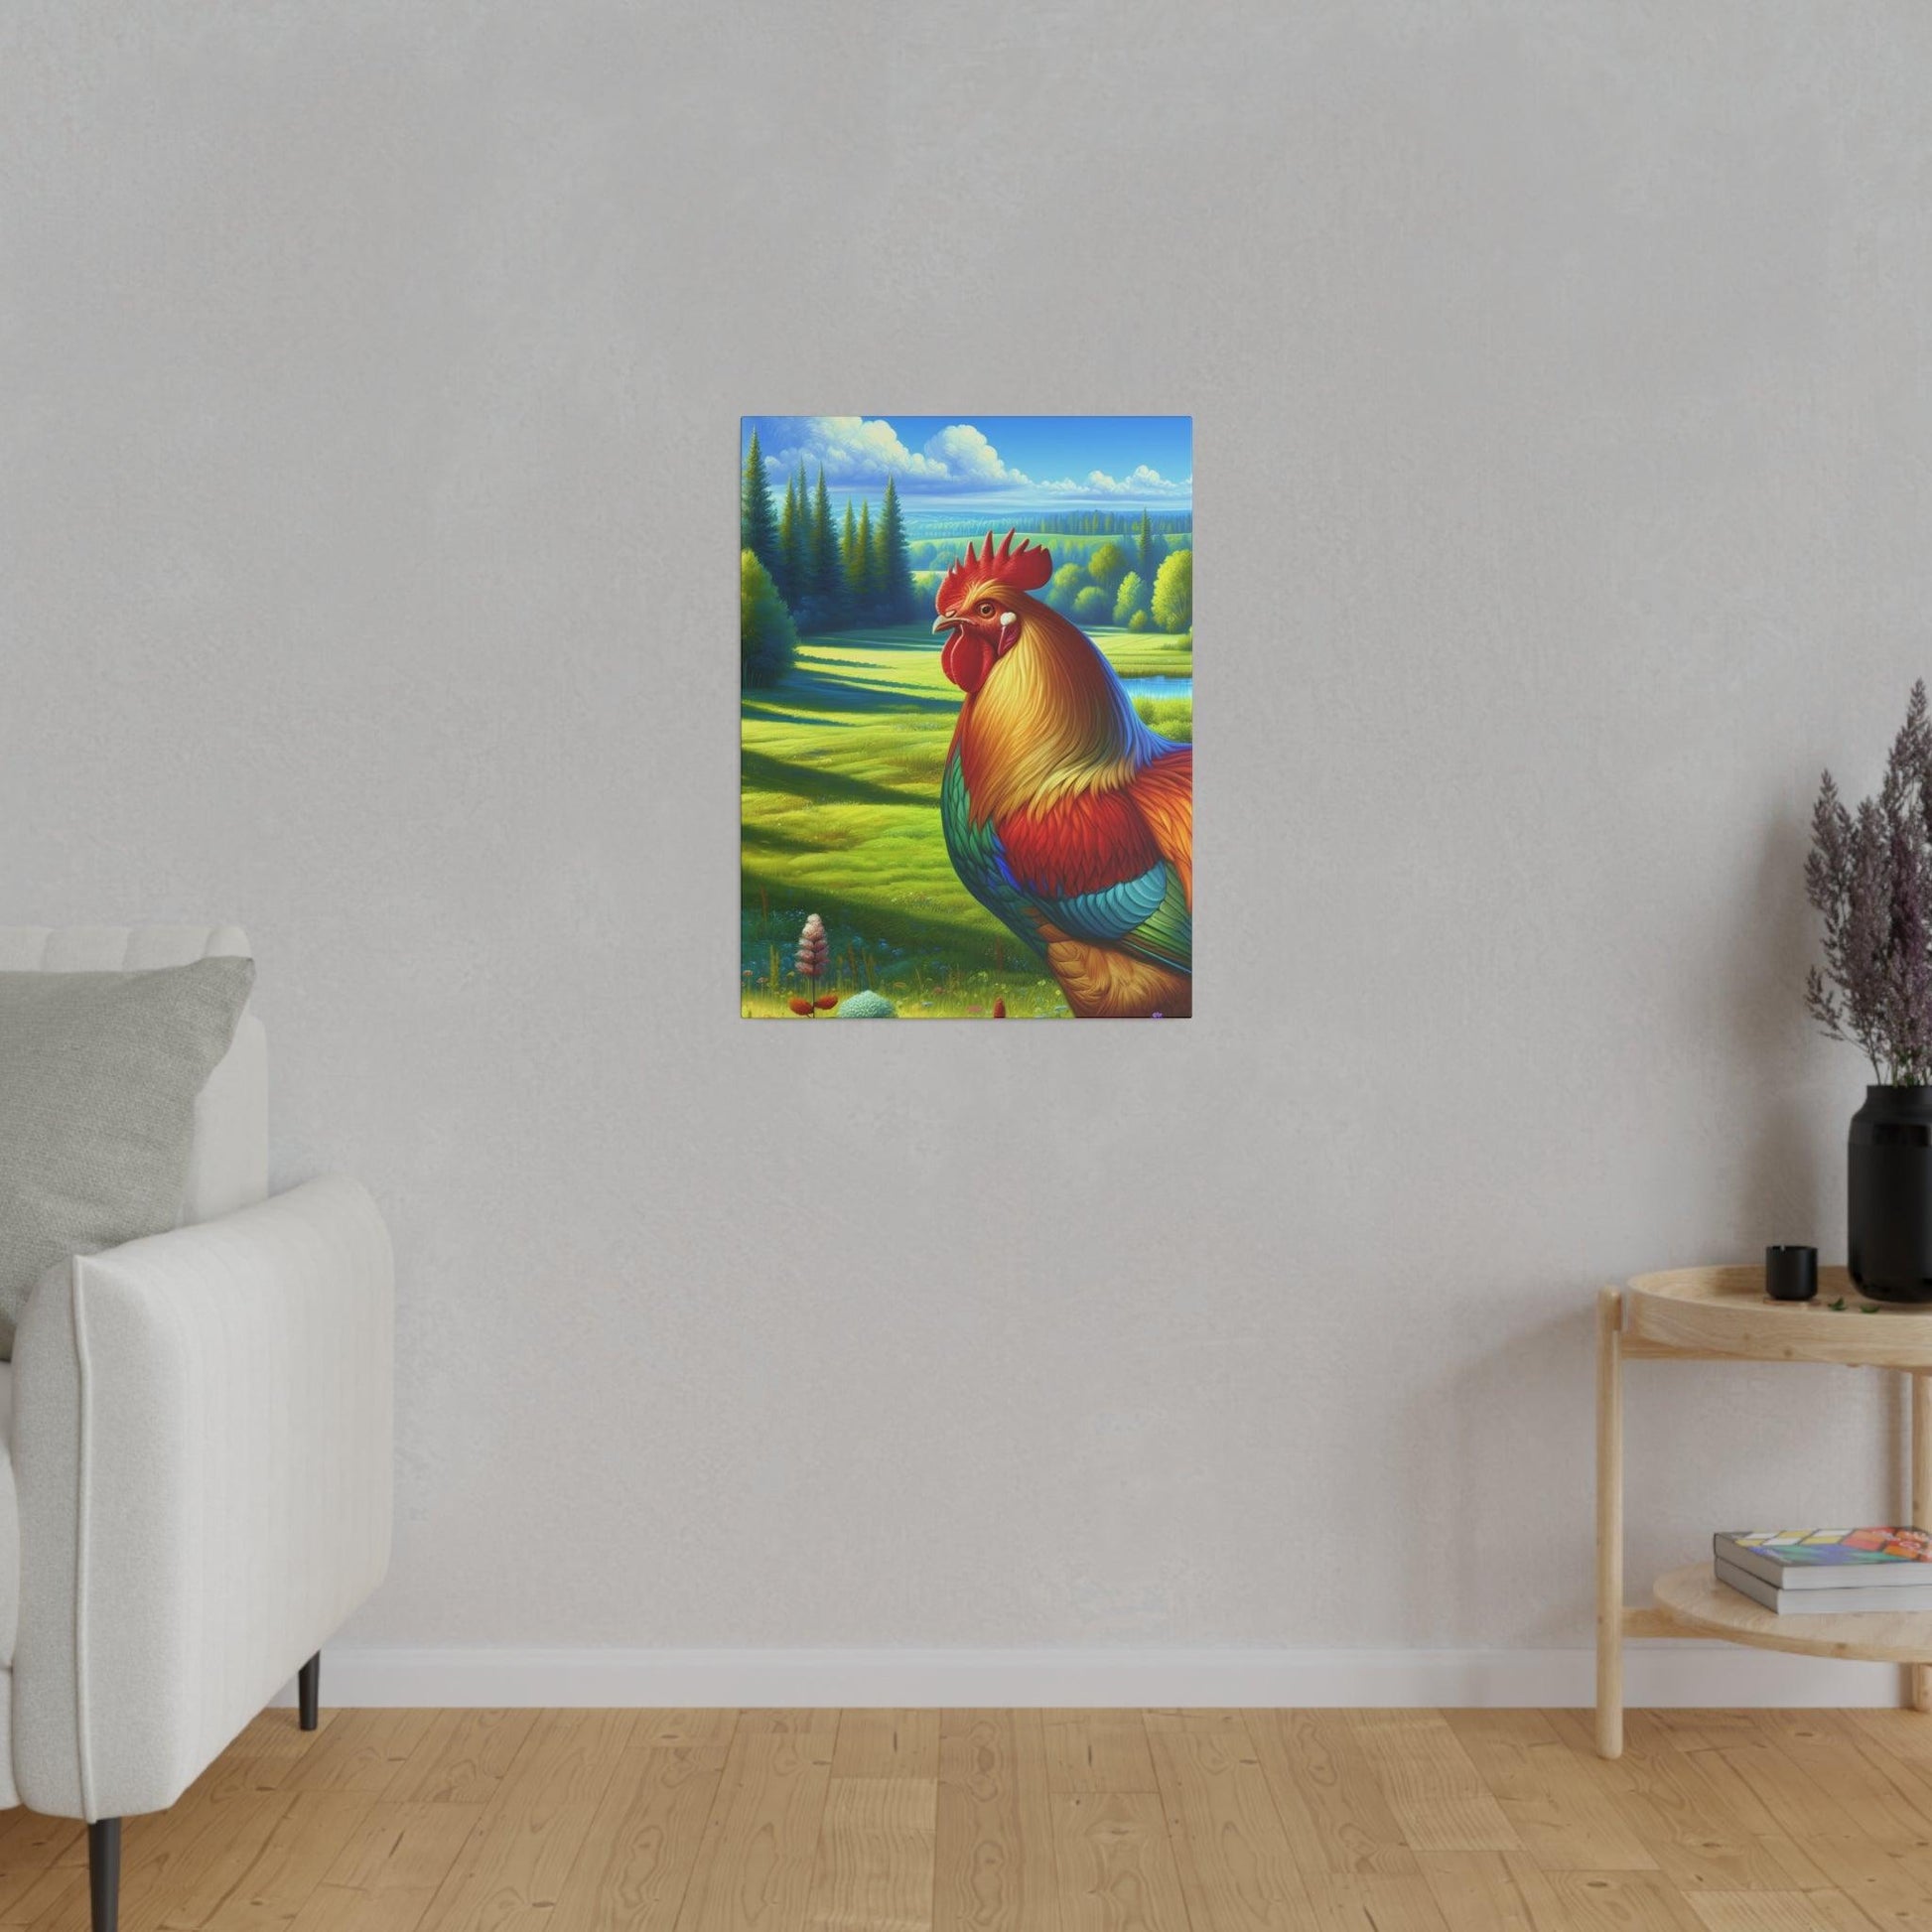 "Chicklectic Visions: Uniquely Crafted Chicken-Inspired Canvas Wall Art" - The Alice Gallery